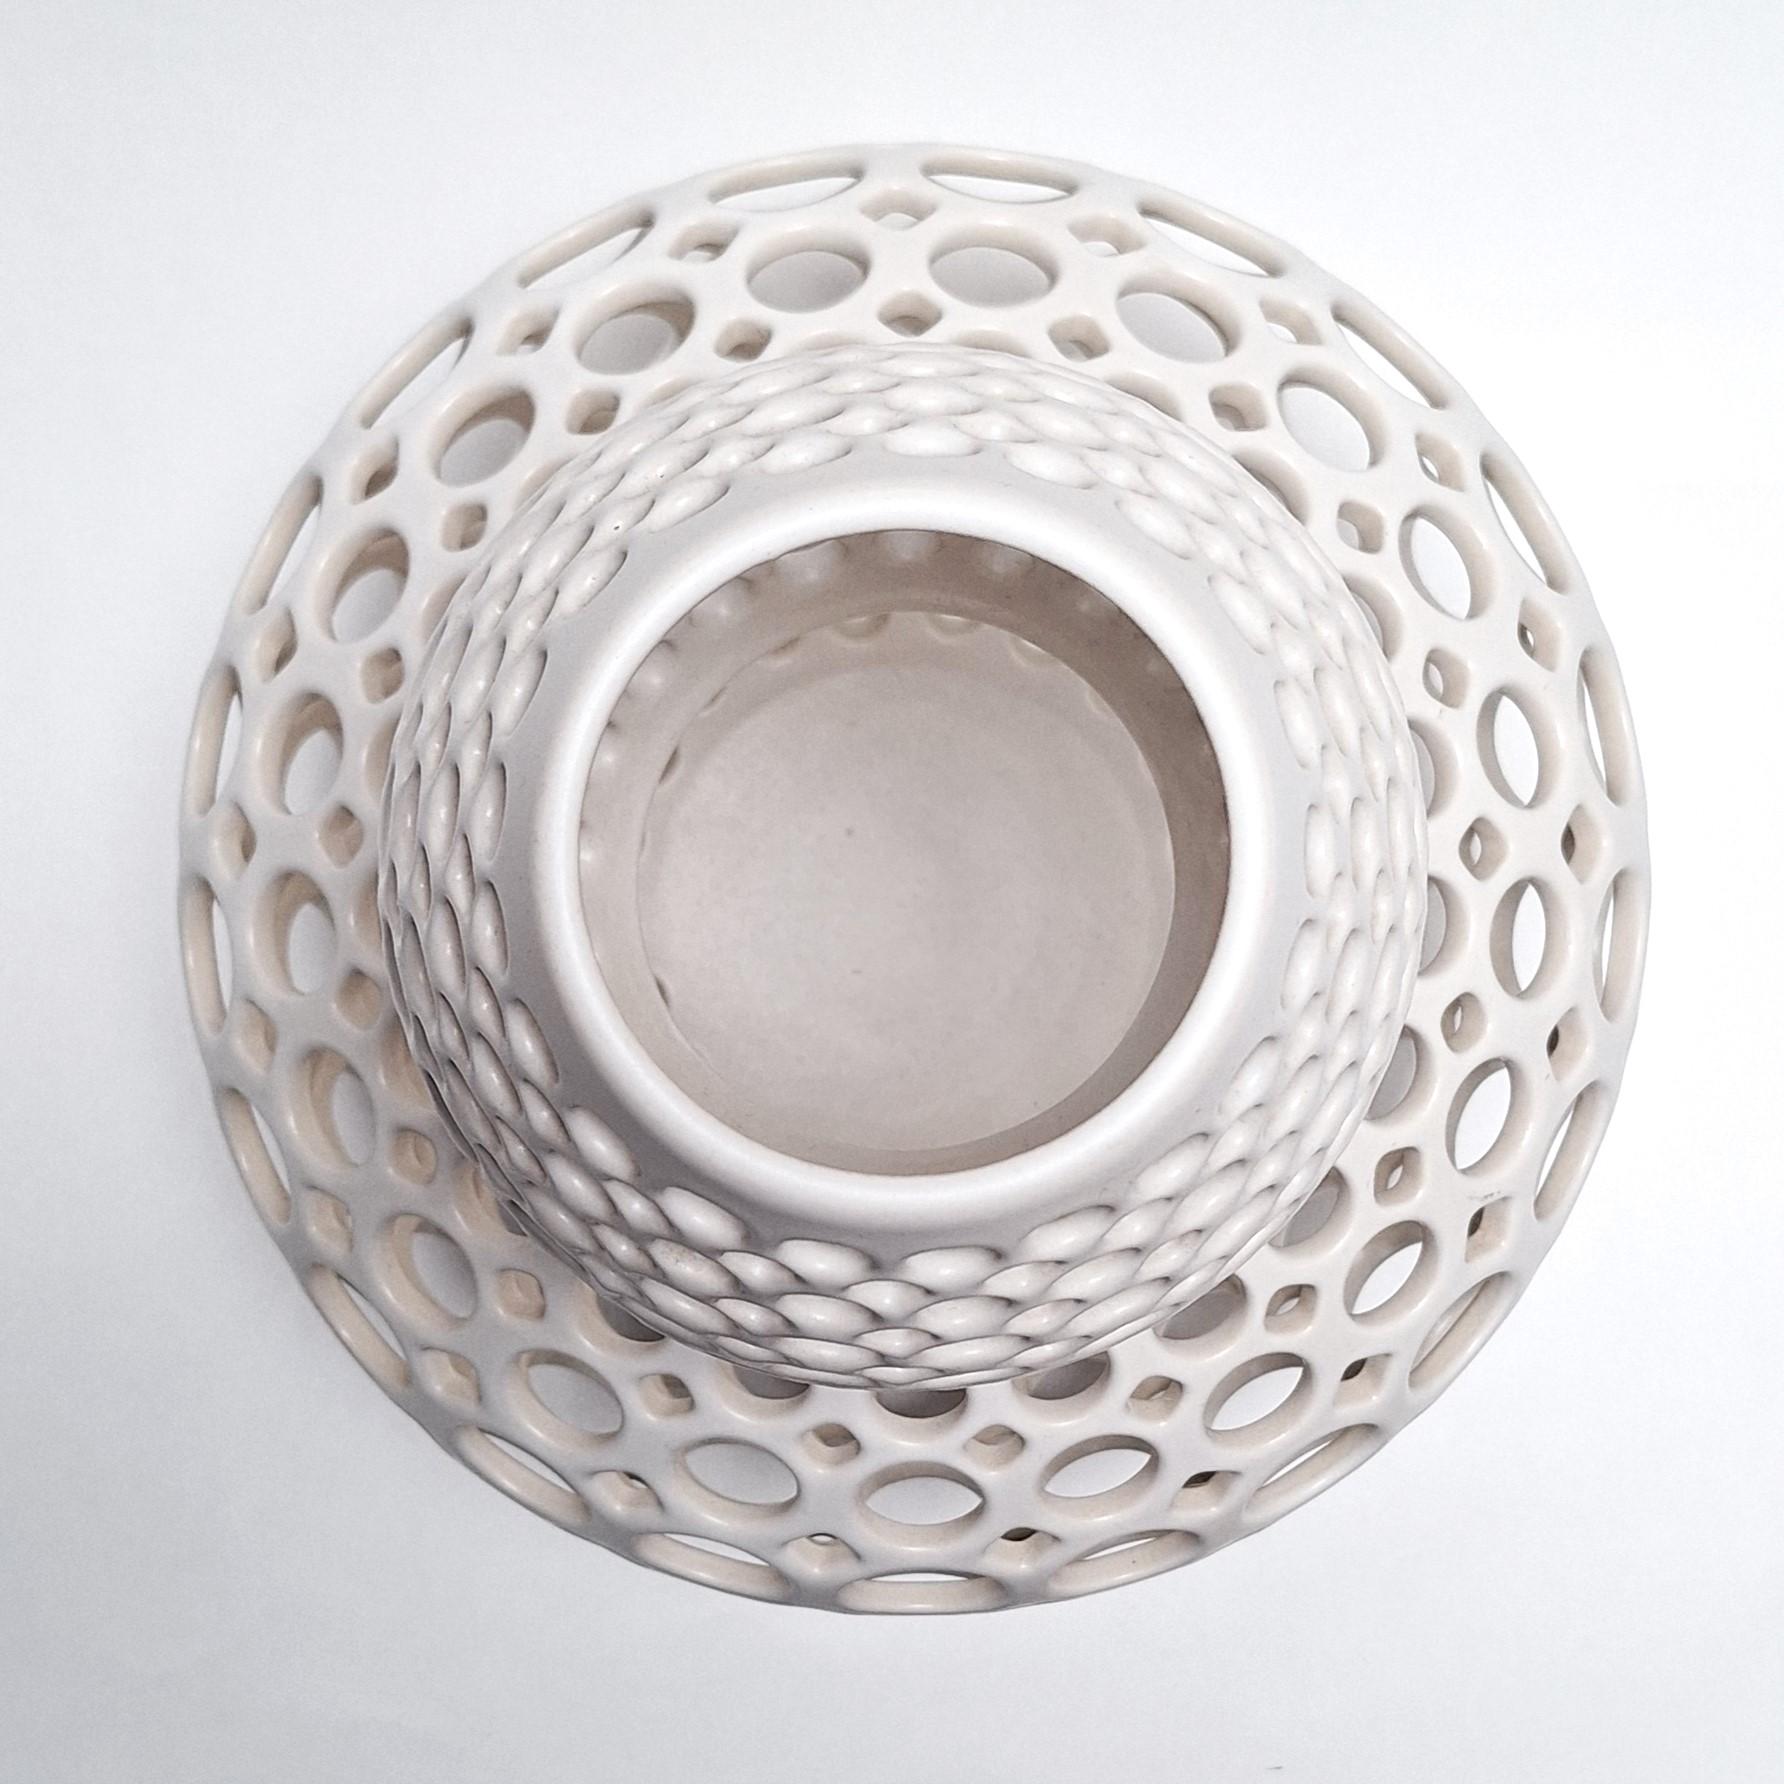 This Double Gourd Round Lace White Vessel is a unique medium size contemporary modern ceramic object by Californian artist Lynne Meade. It is wheel thrown, hand pierced and has a smooth white satin glaze. Everything is done by eye, without molds or